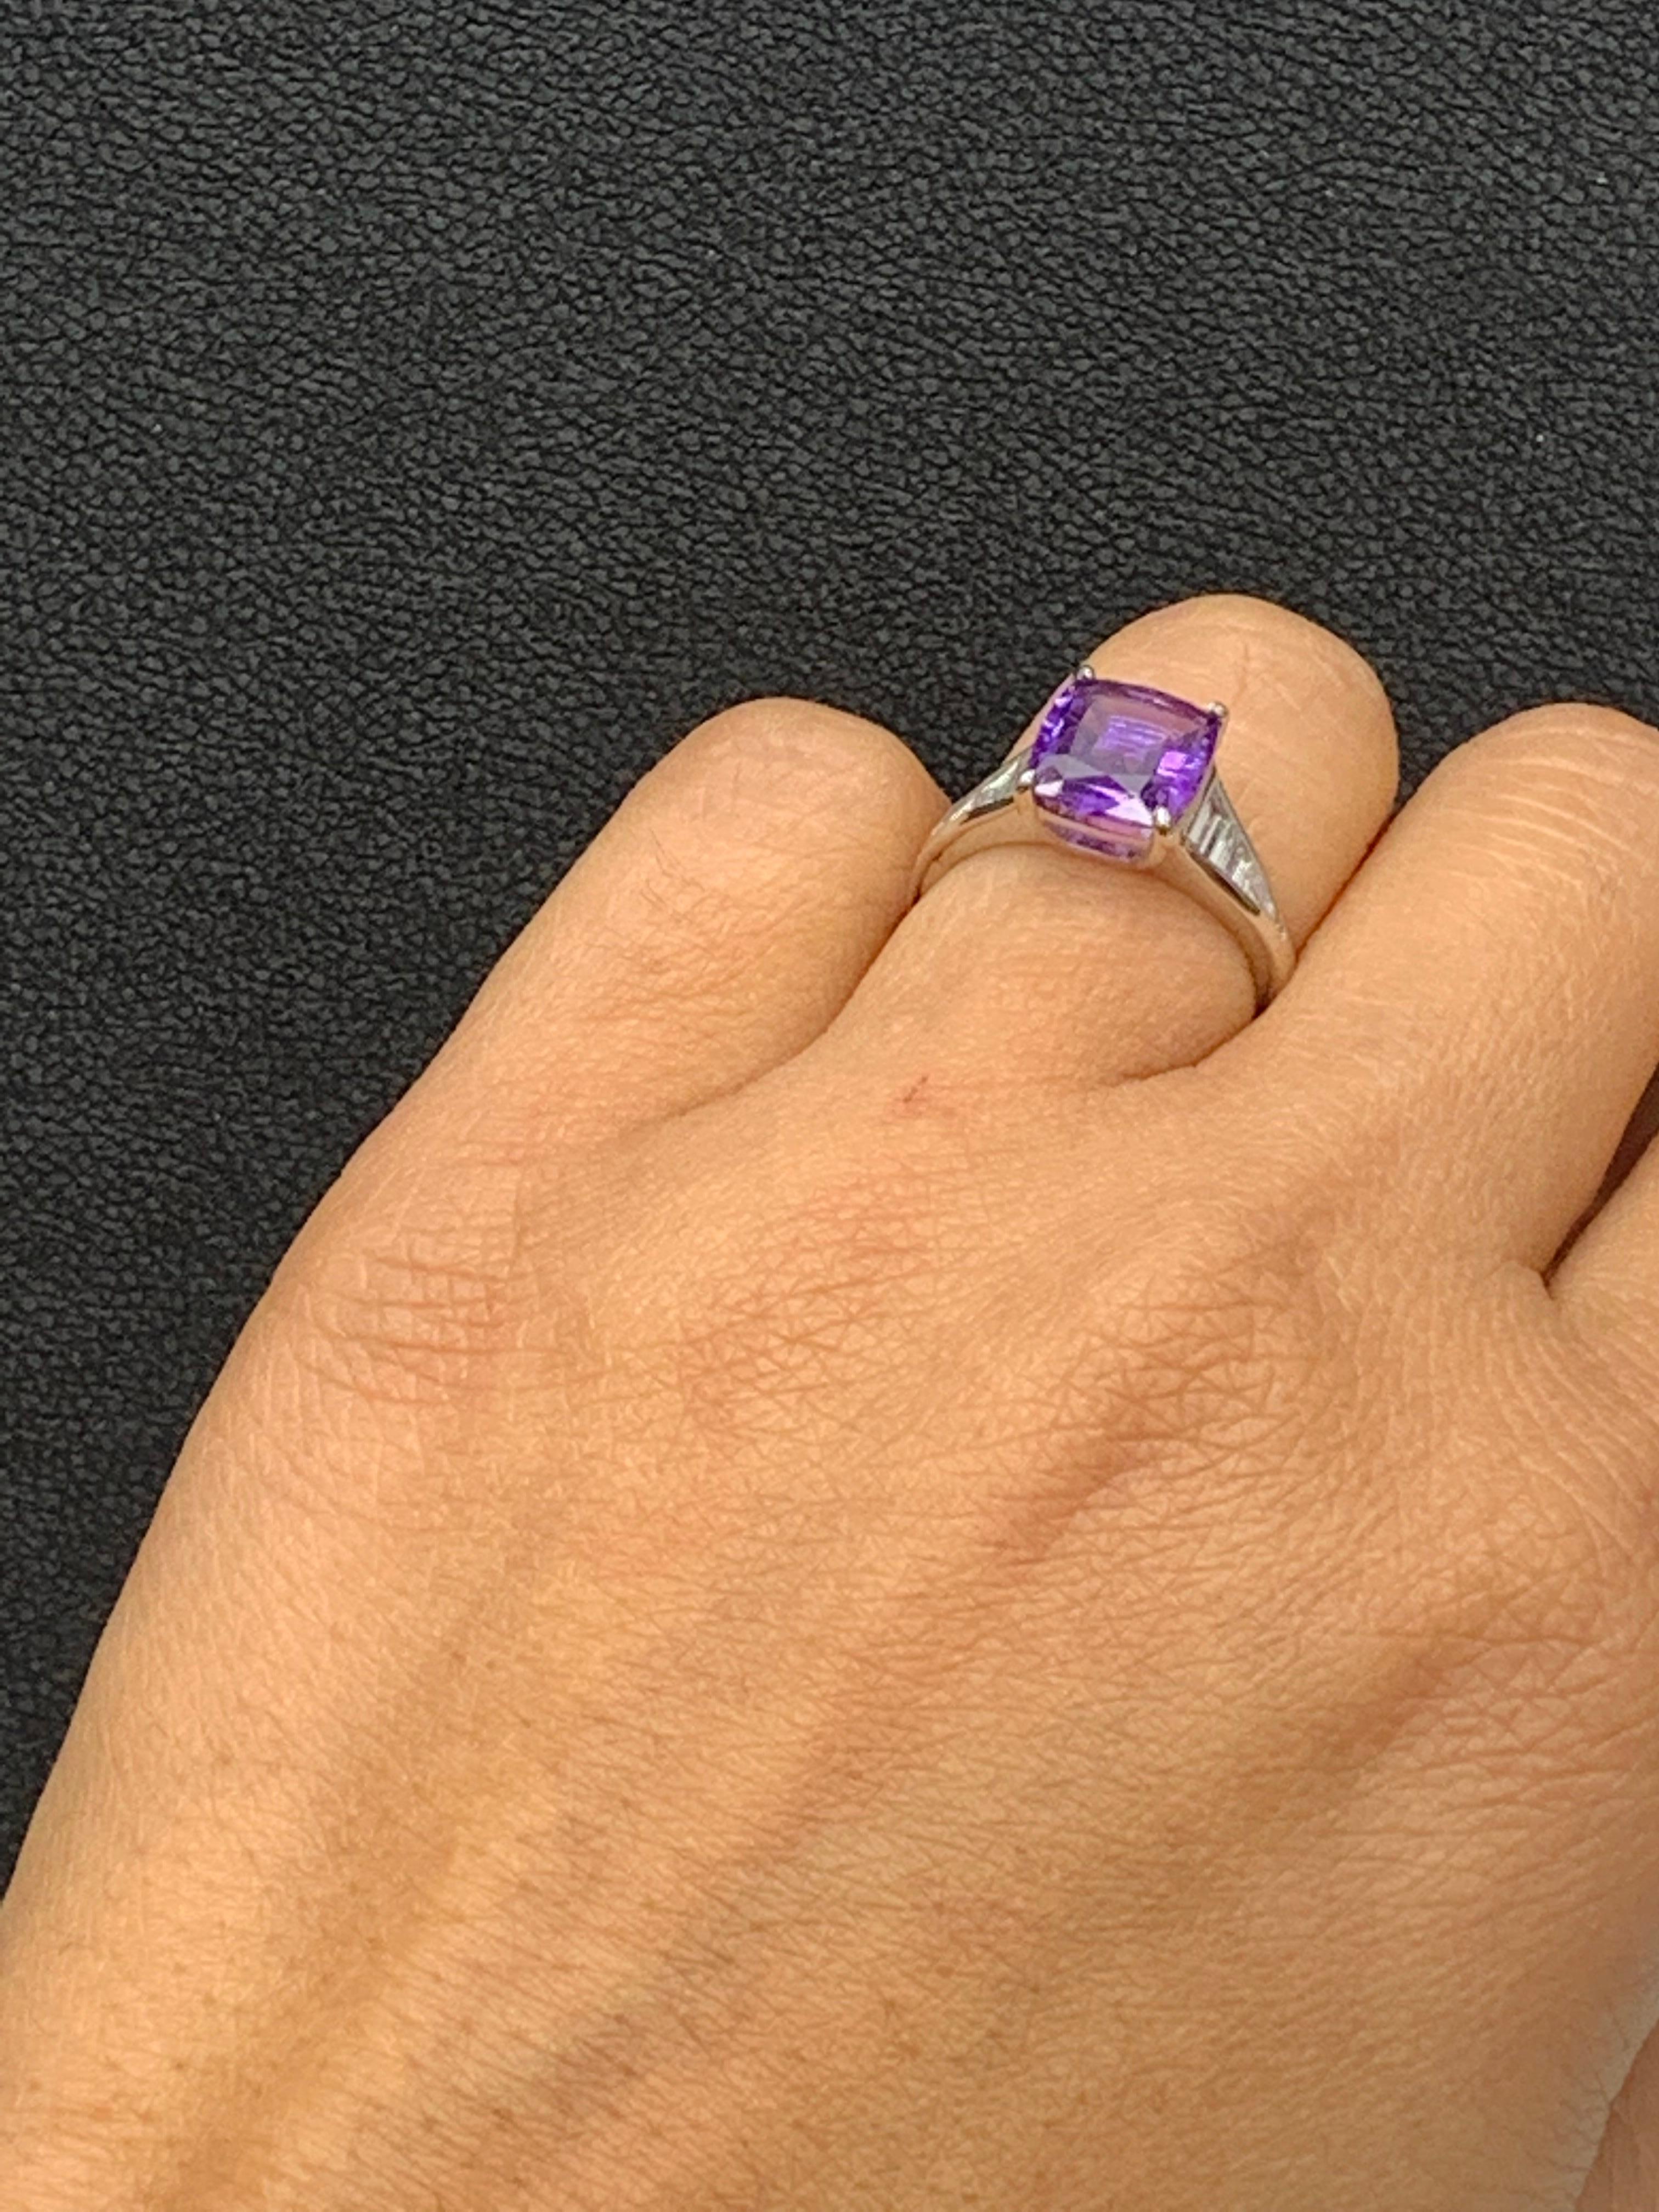 3.20 Carat Cushion Cut Purple Sapphire and Diamond Engagement Ring in Platinum For Sale 4